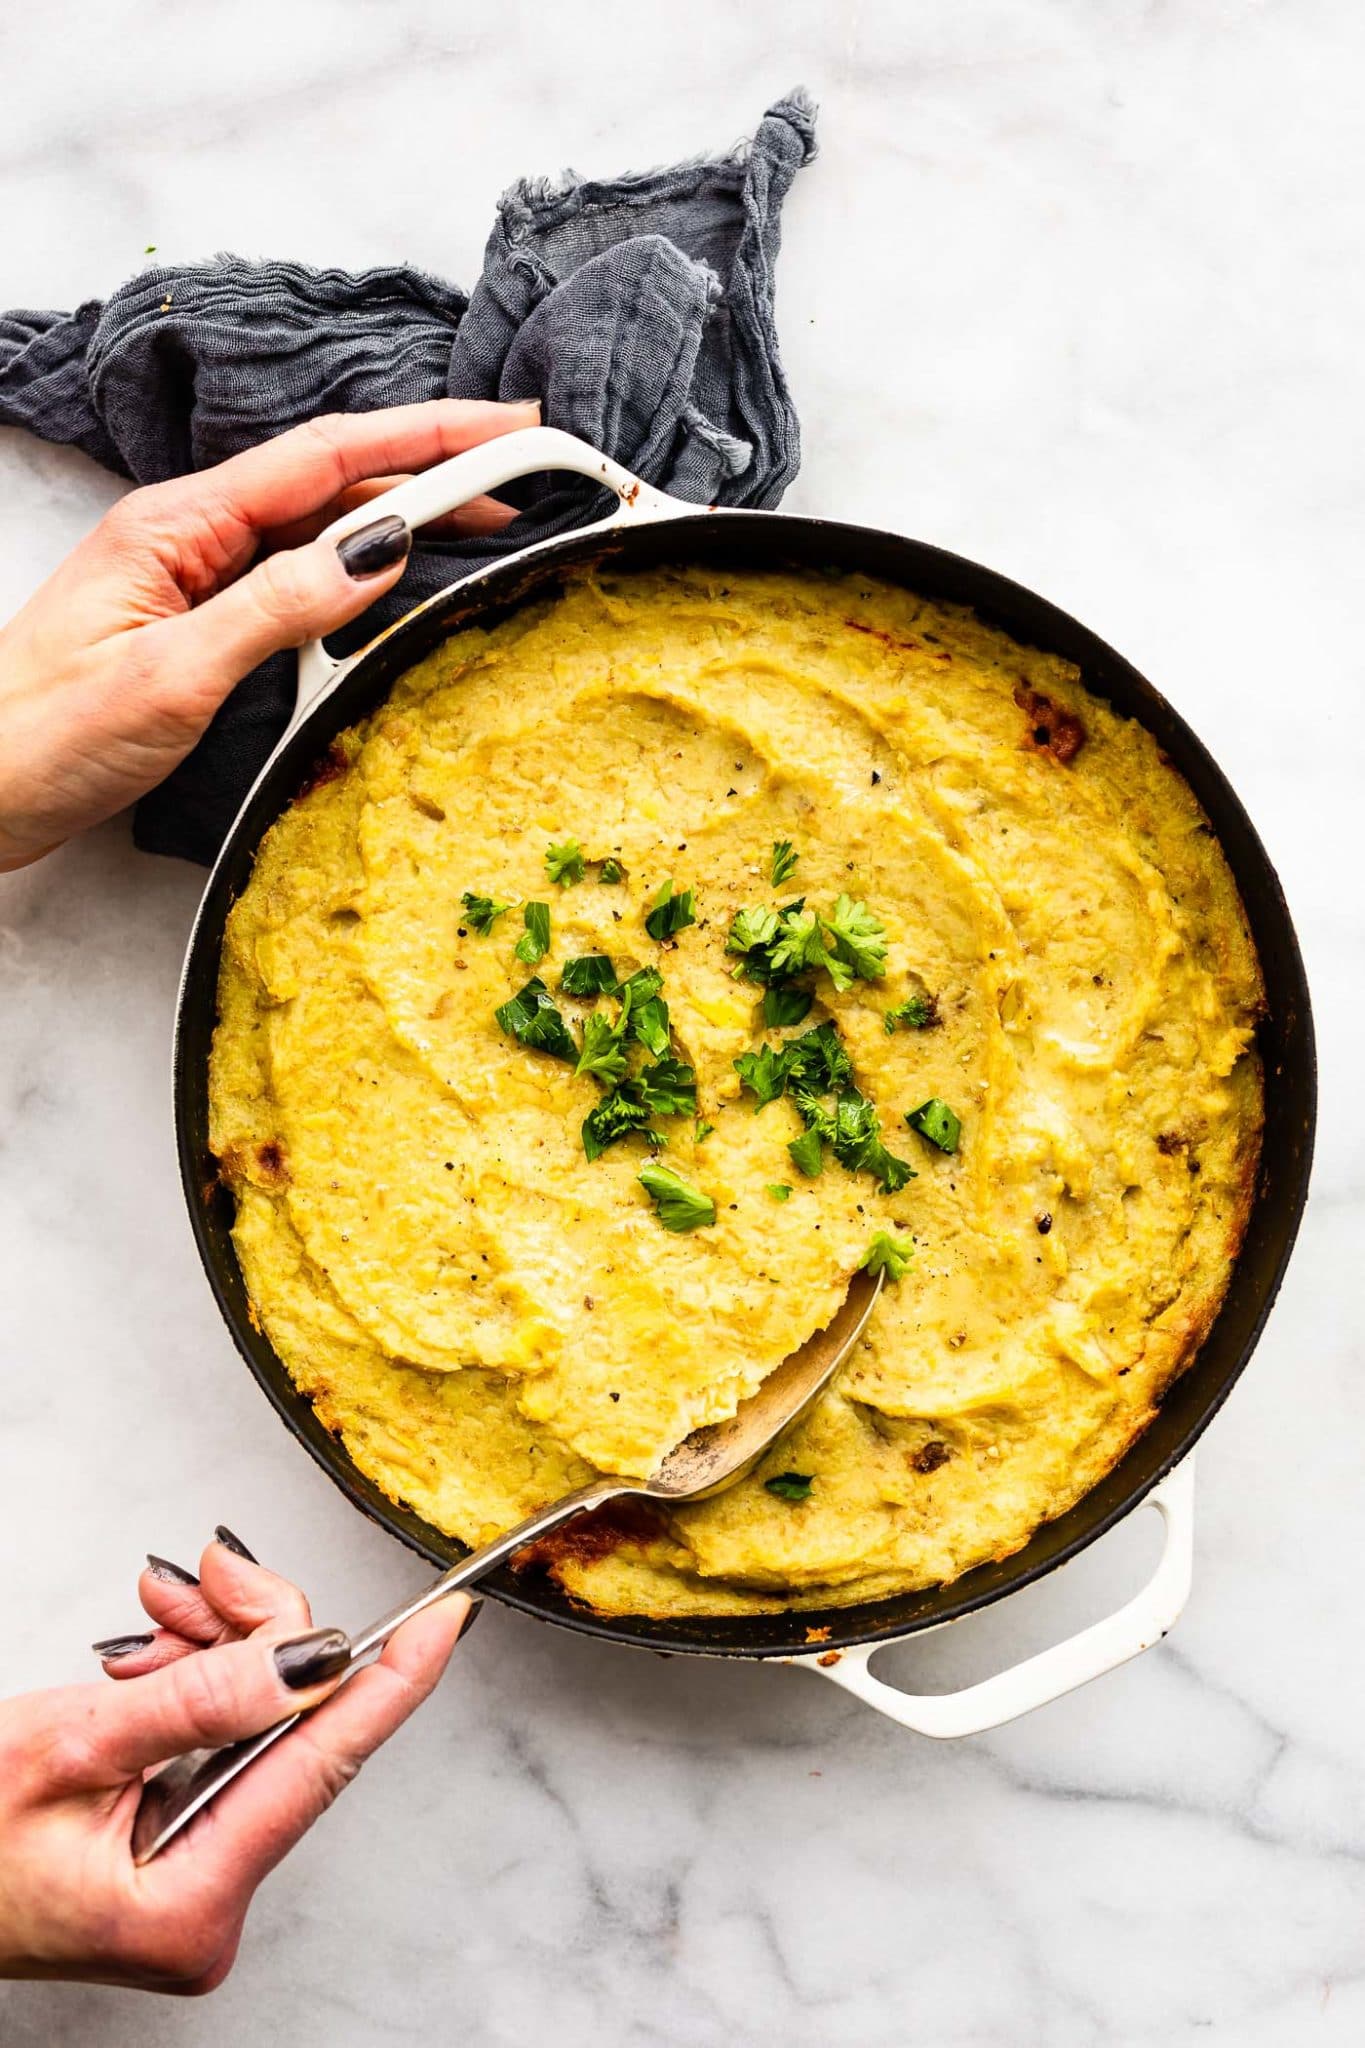 a woman's hands dipping a spoon into a pan full of potato and cauliflower shepherd's pie